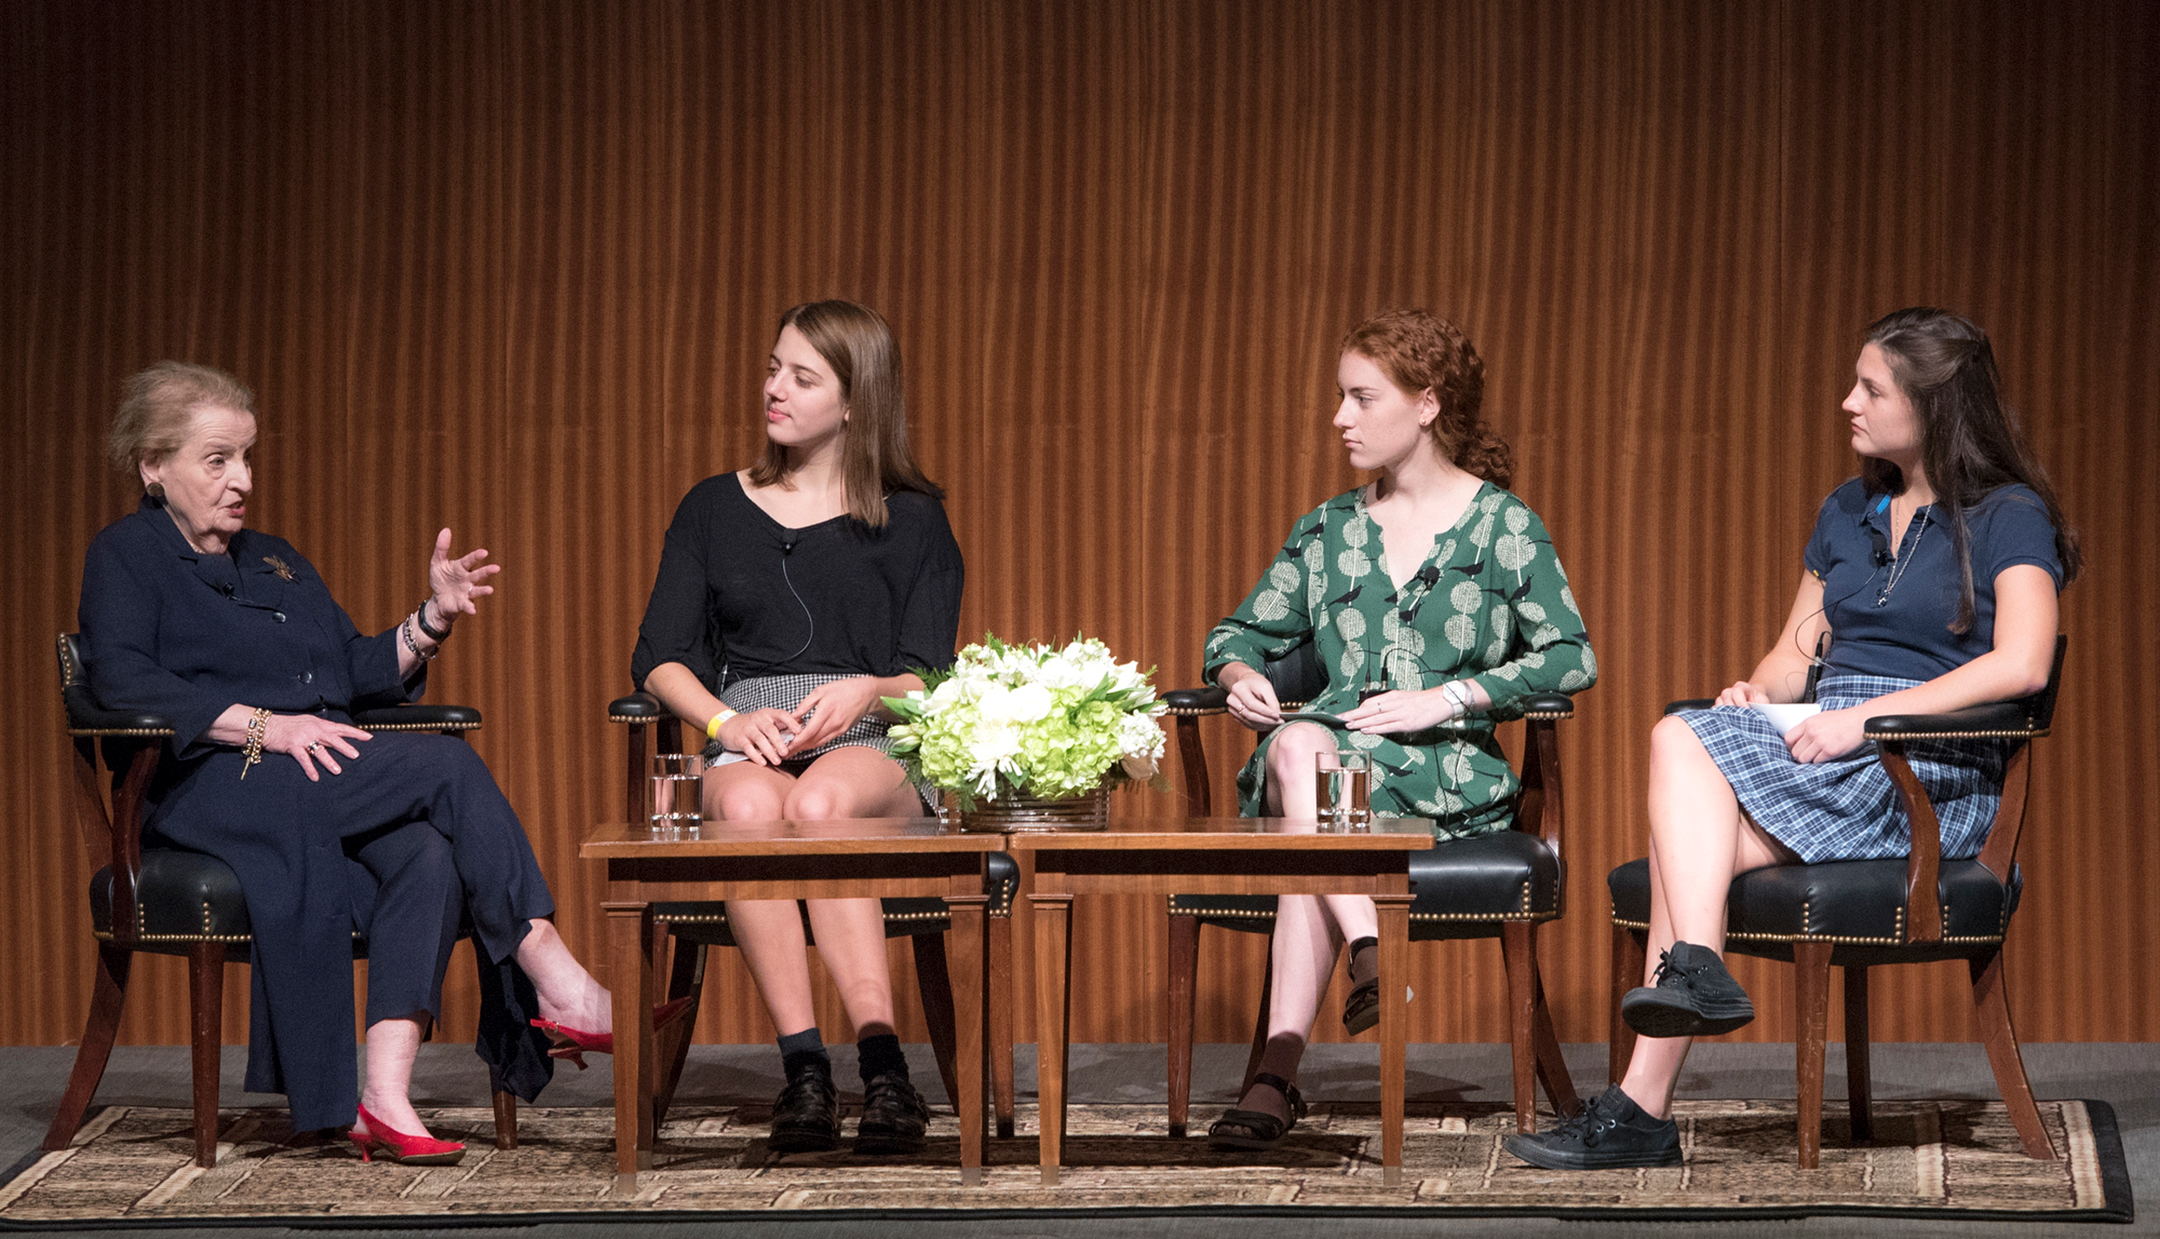 Madeleine Albright on a stage, at left, speaking with three female students